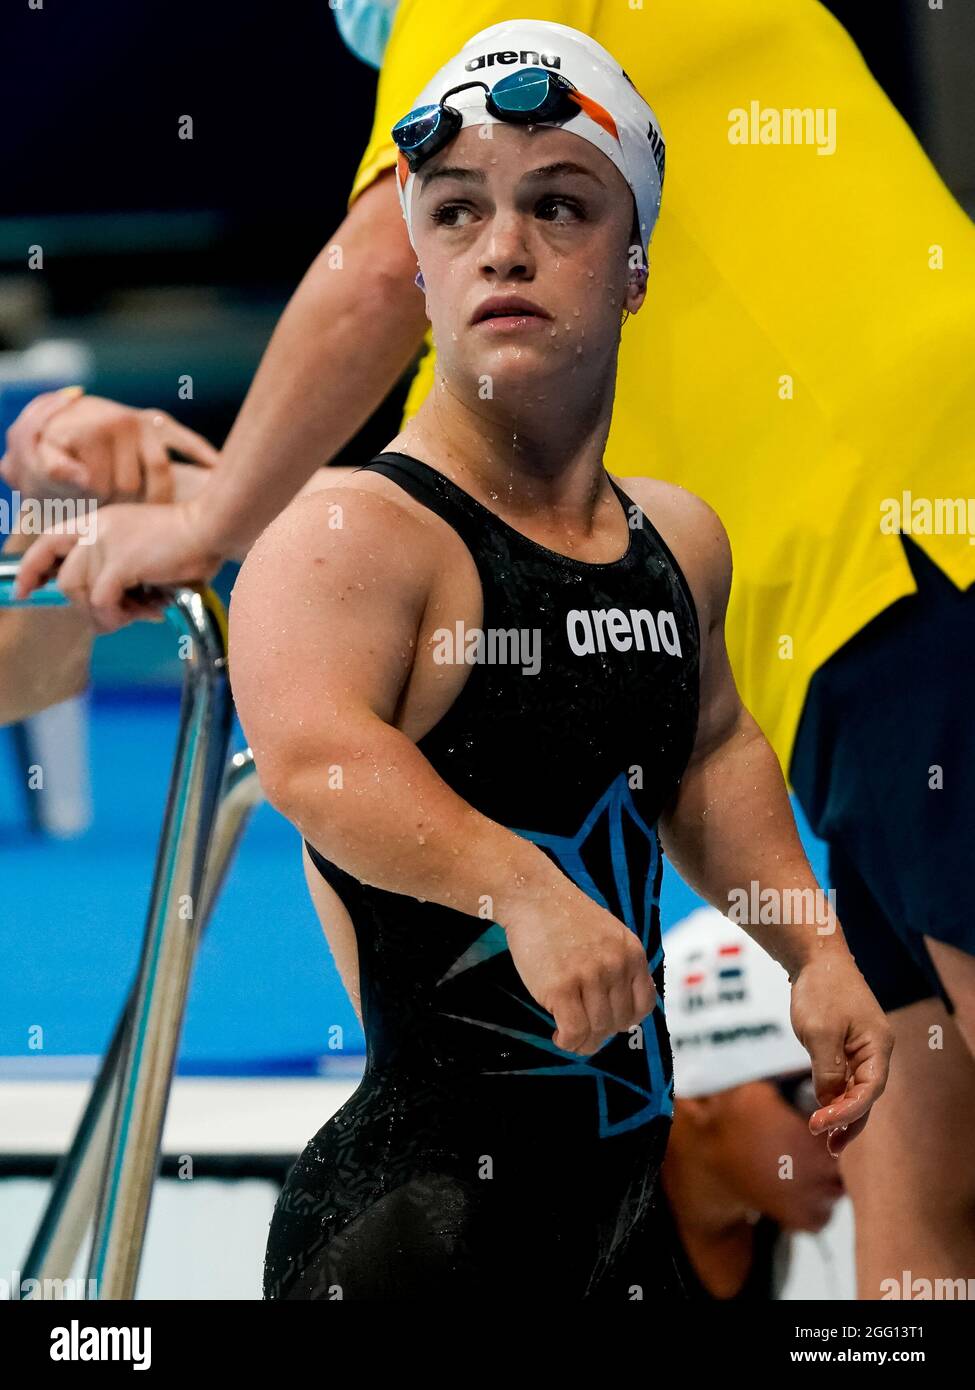 TOKYO, JAPAN - AUGUST 28: Sophia Herzog of the United States after competing in the Women's 100m Breaststroke SB6 Heats during the Tokyo 2020 Paralympic Games at Tokyo Aquatics Centre on August 28, 2021 in Tokyo, Japan (Photo by Ilse Schaffers/Orange Pictures) NOCNSF Stock Photo